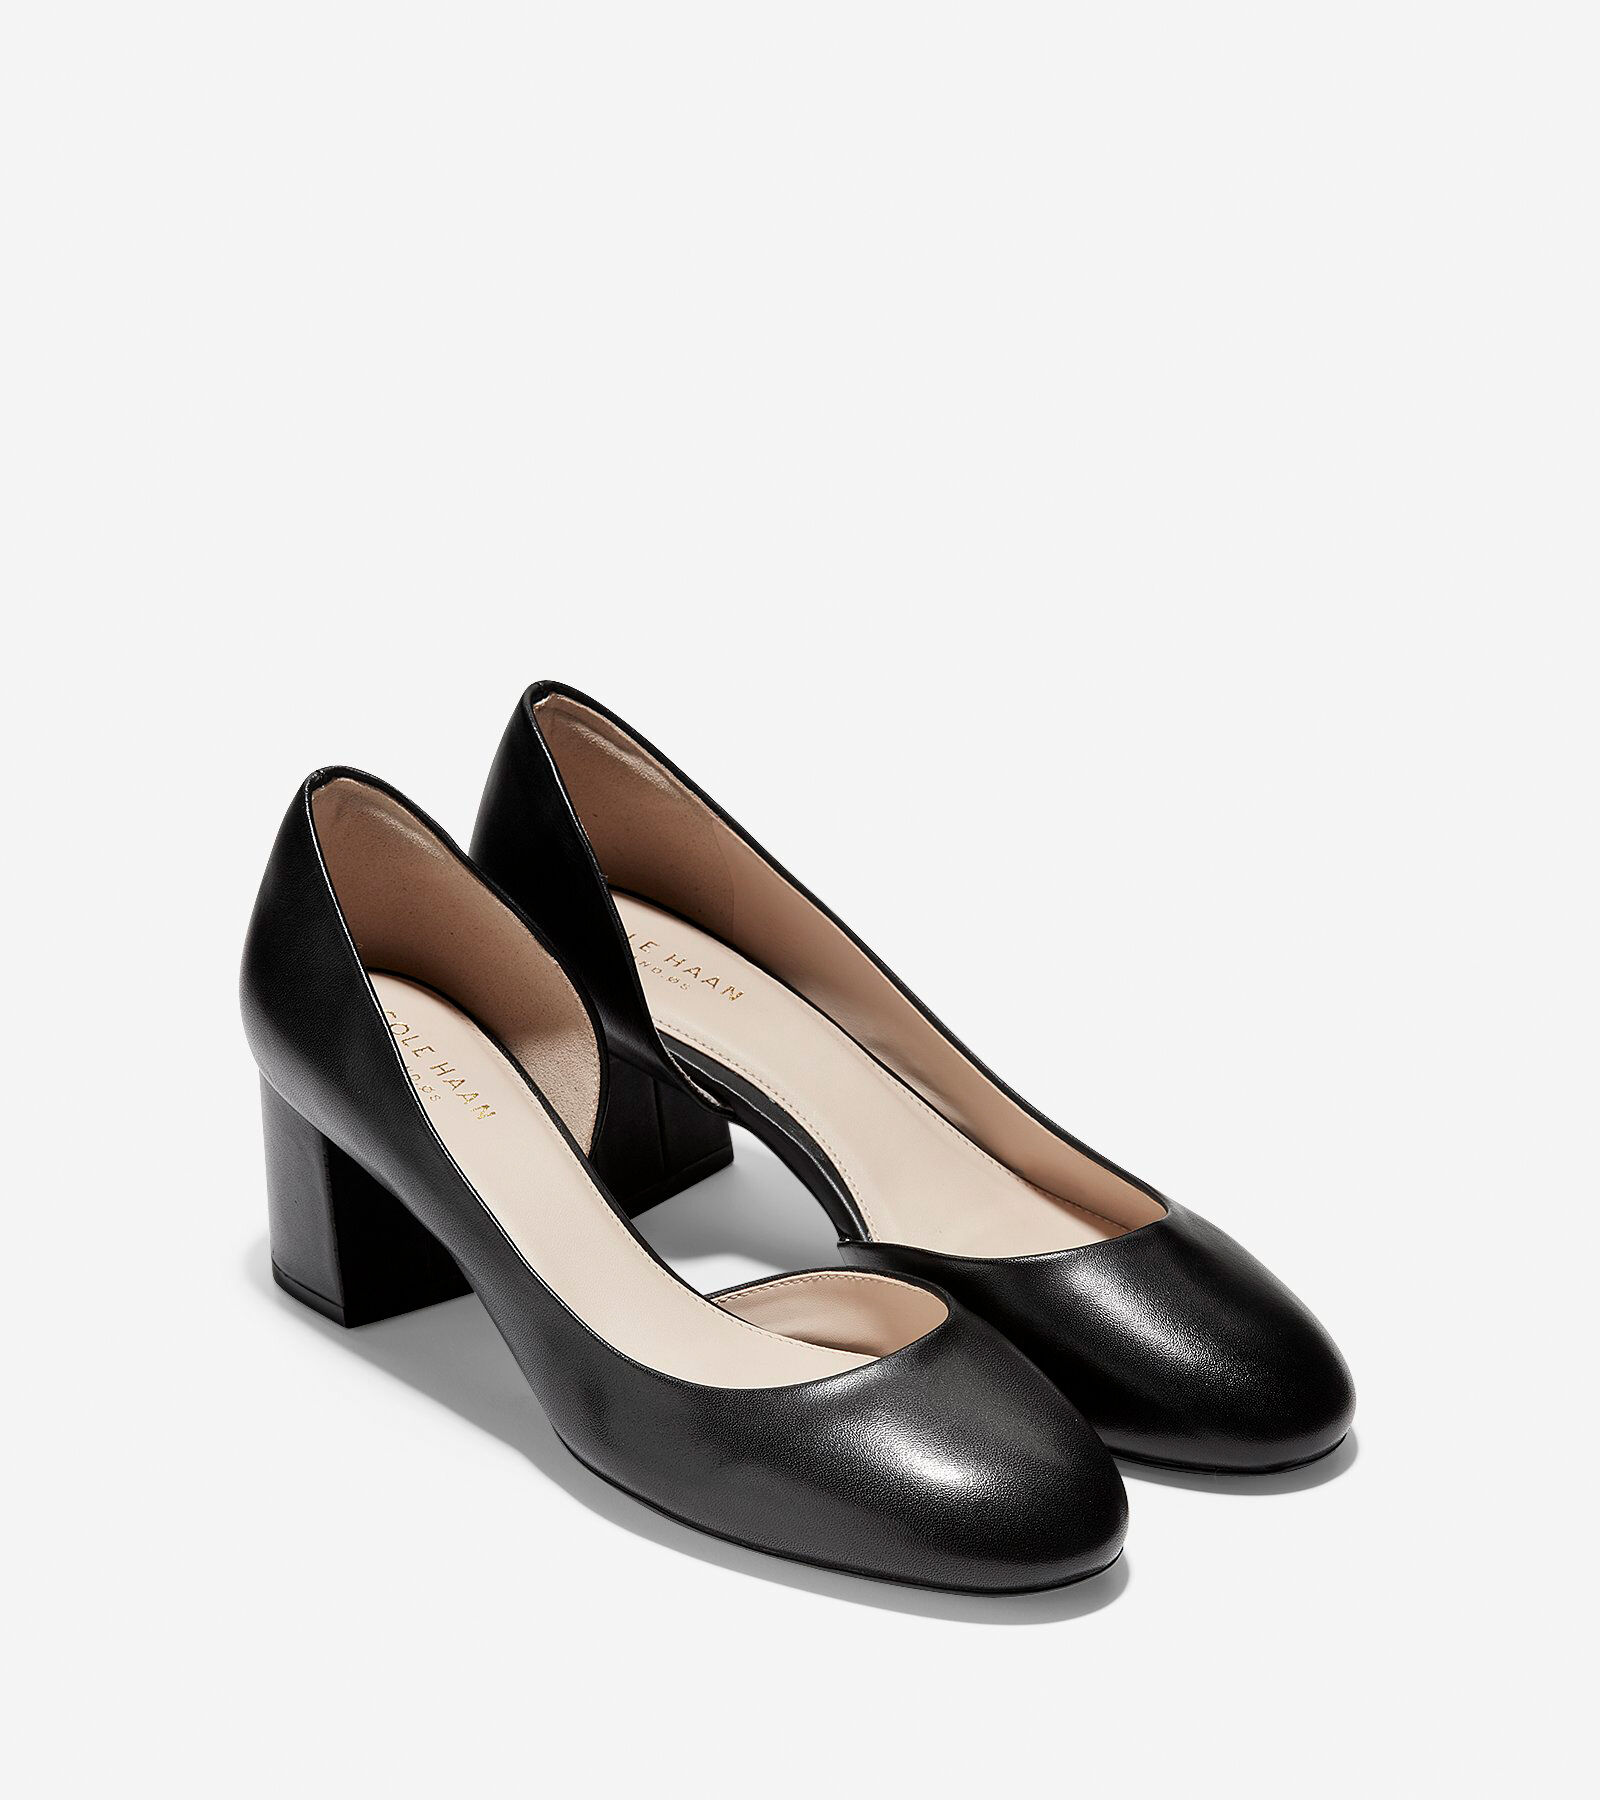 cole haan leather pumps